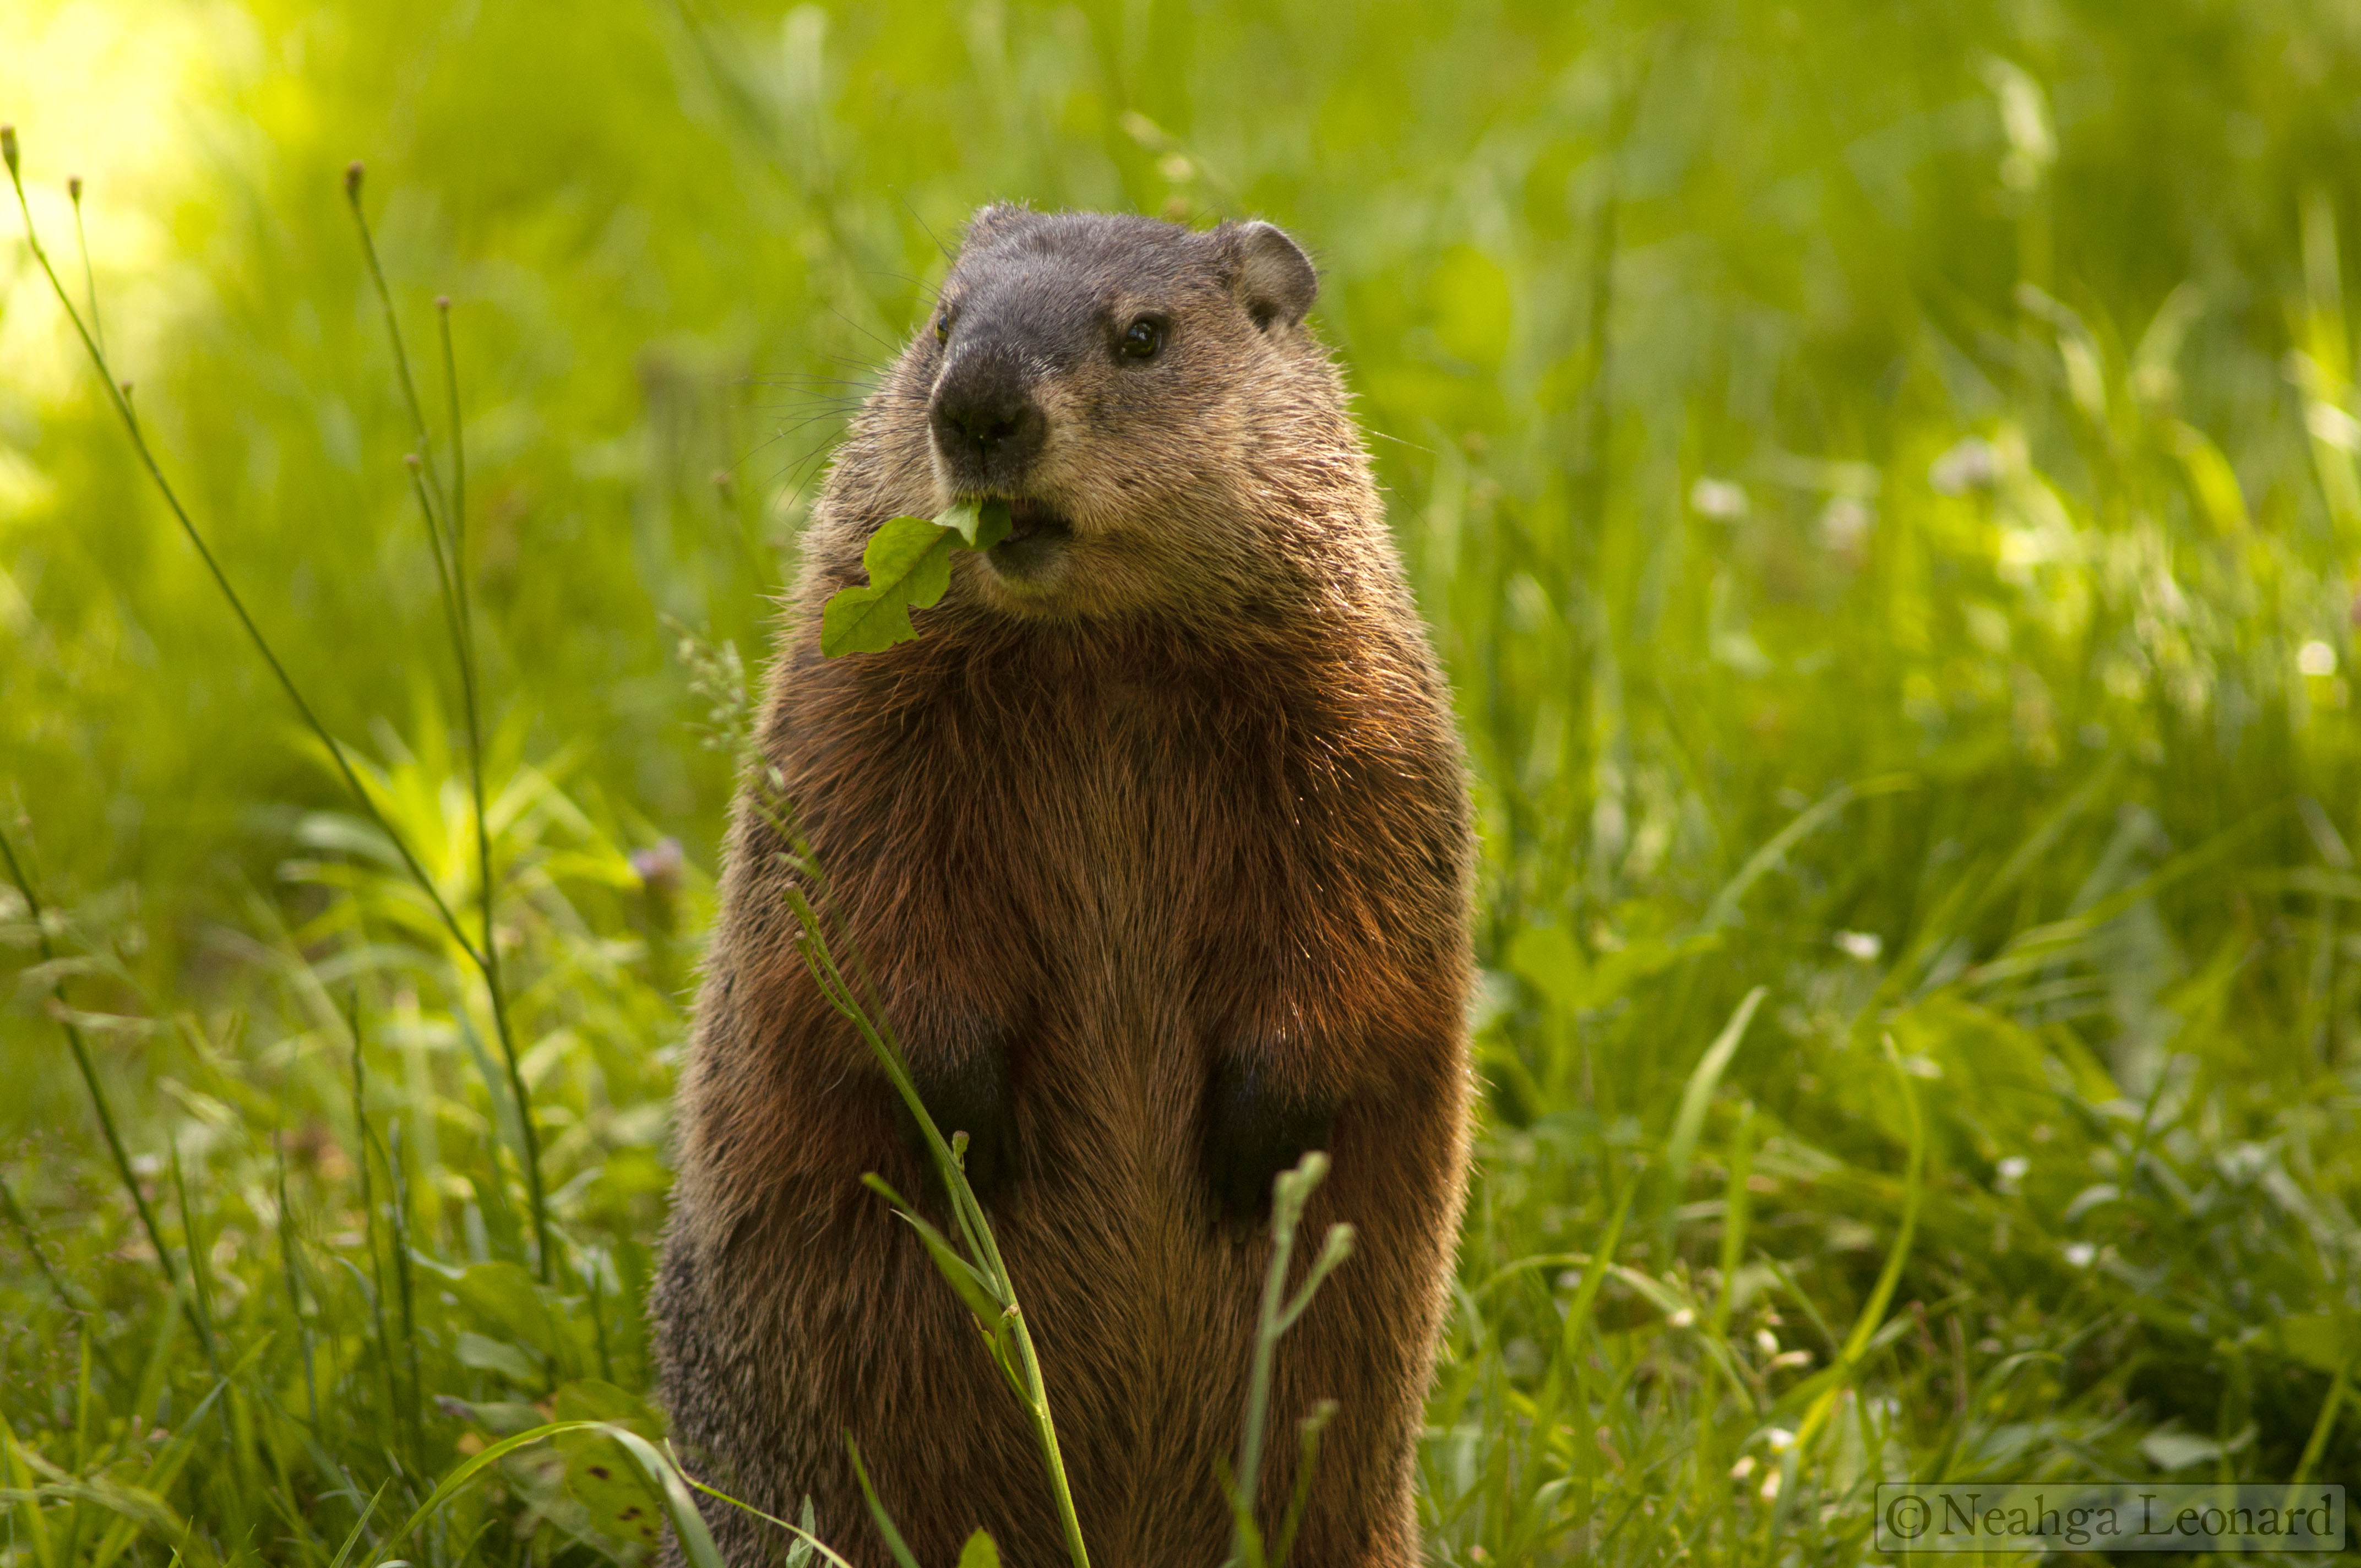 Of Woodchucks (and Lawns). Writing for Nature